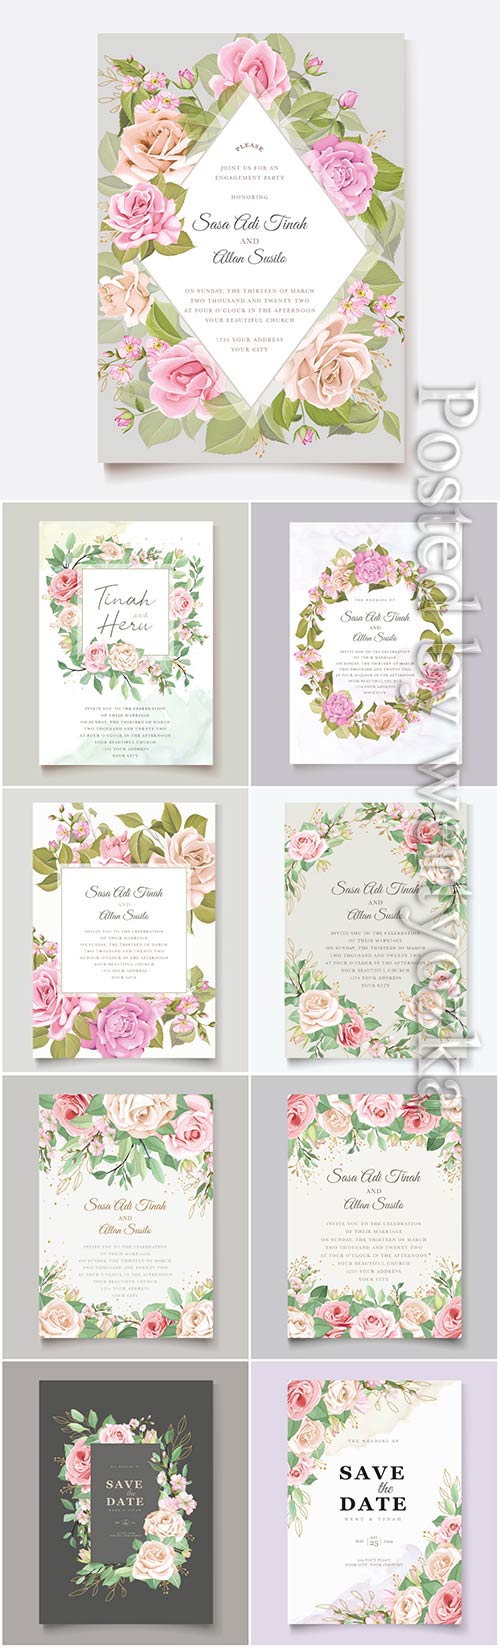 Wedding invitation cards with flowers in vector # 3